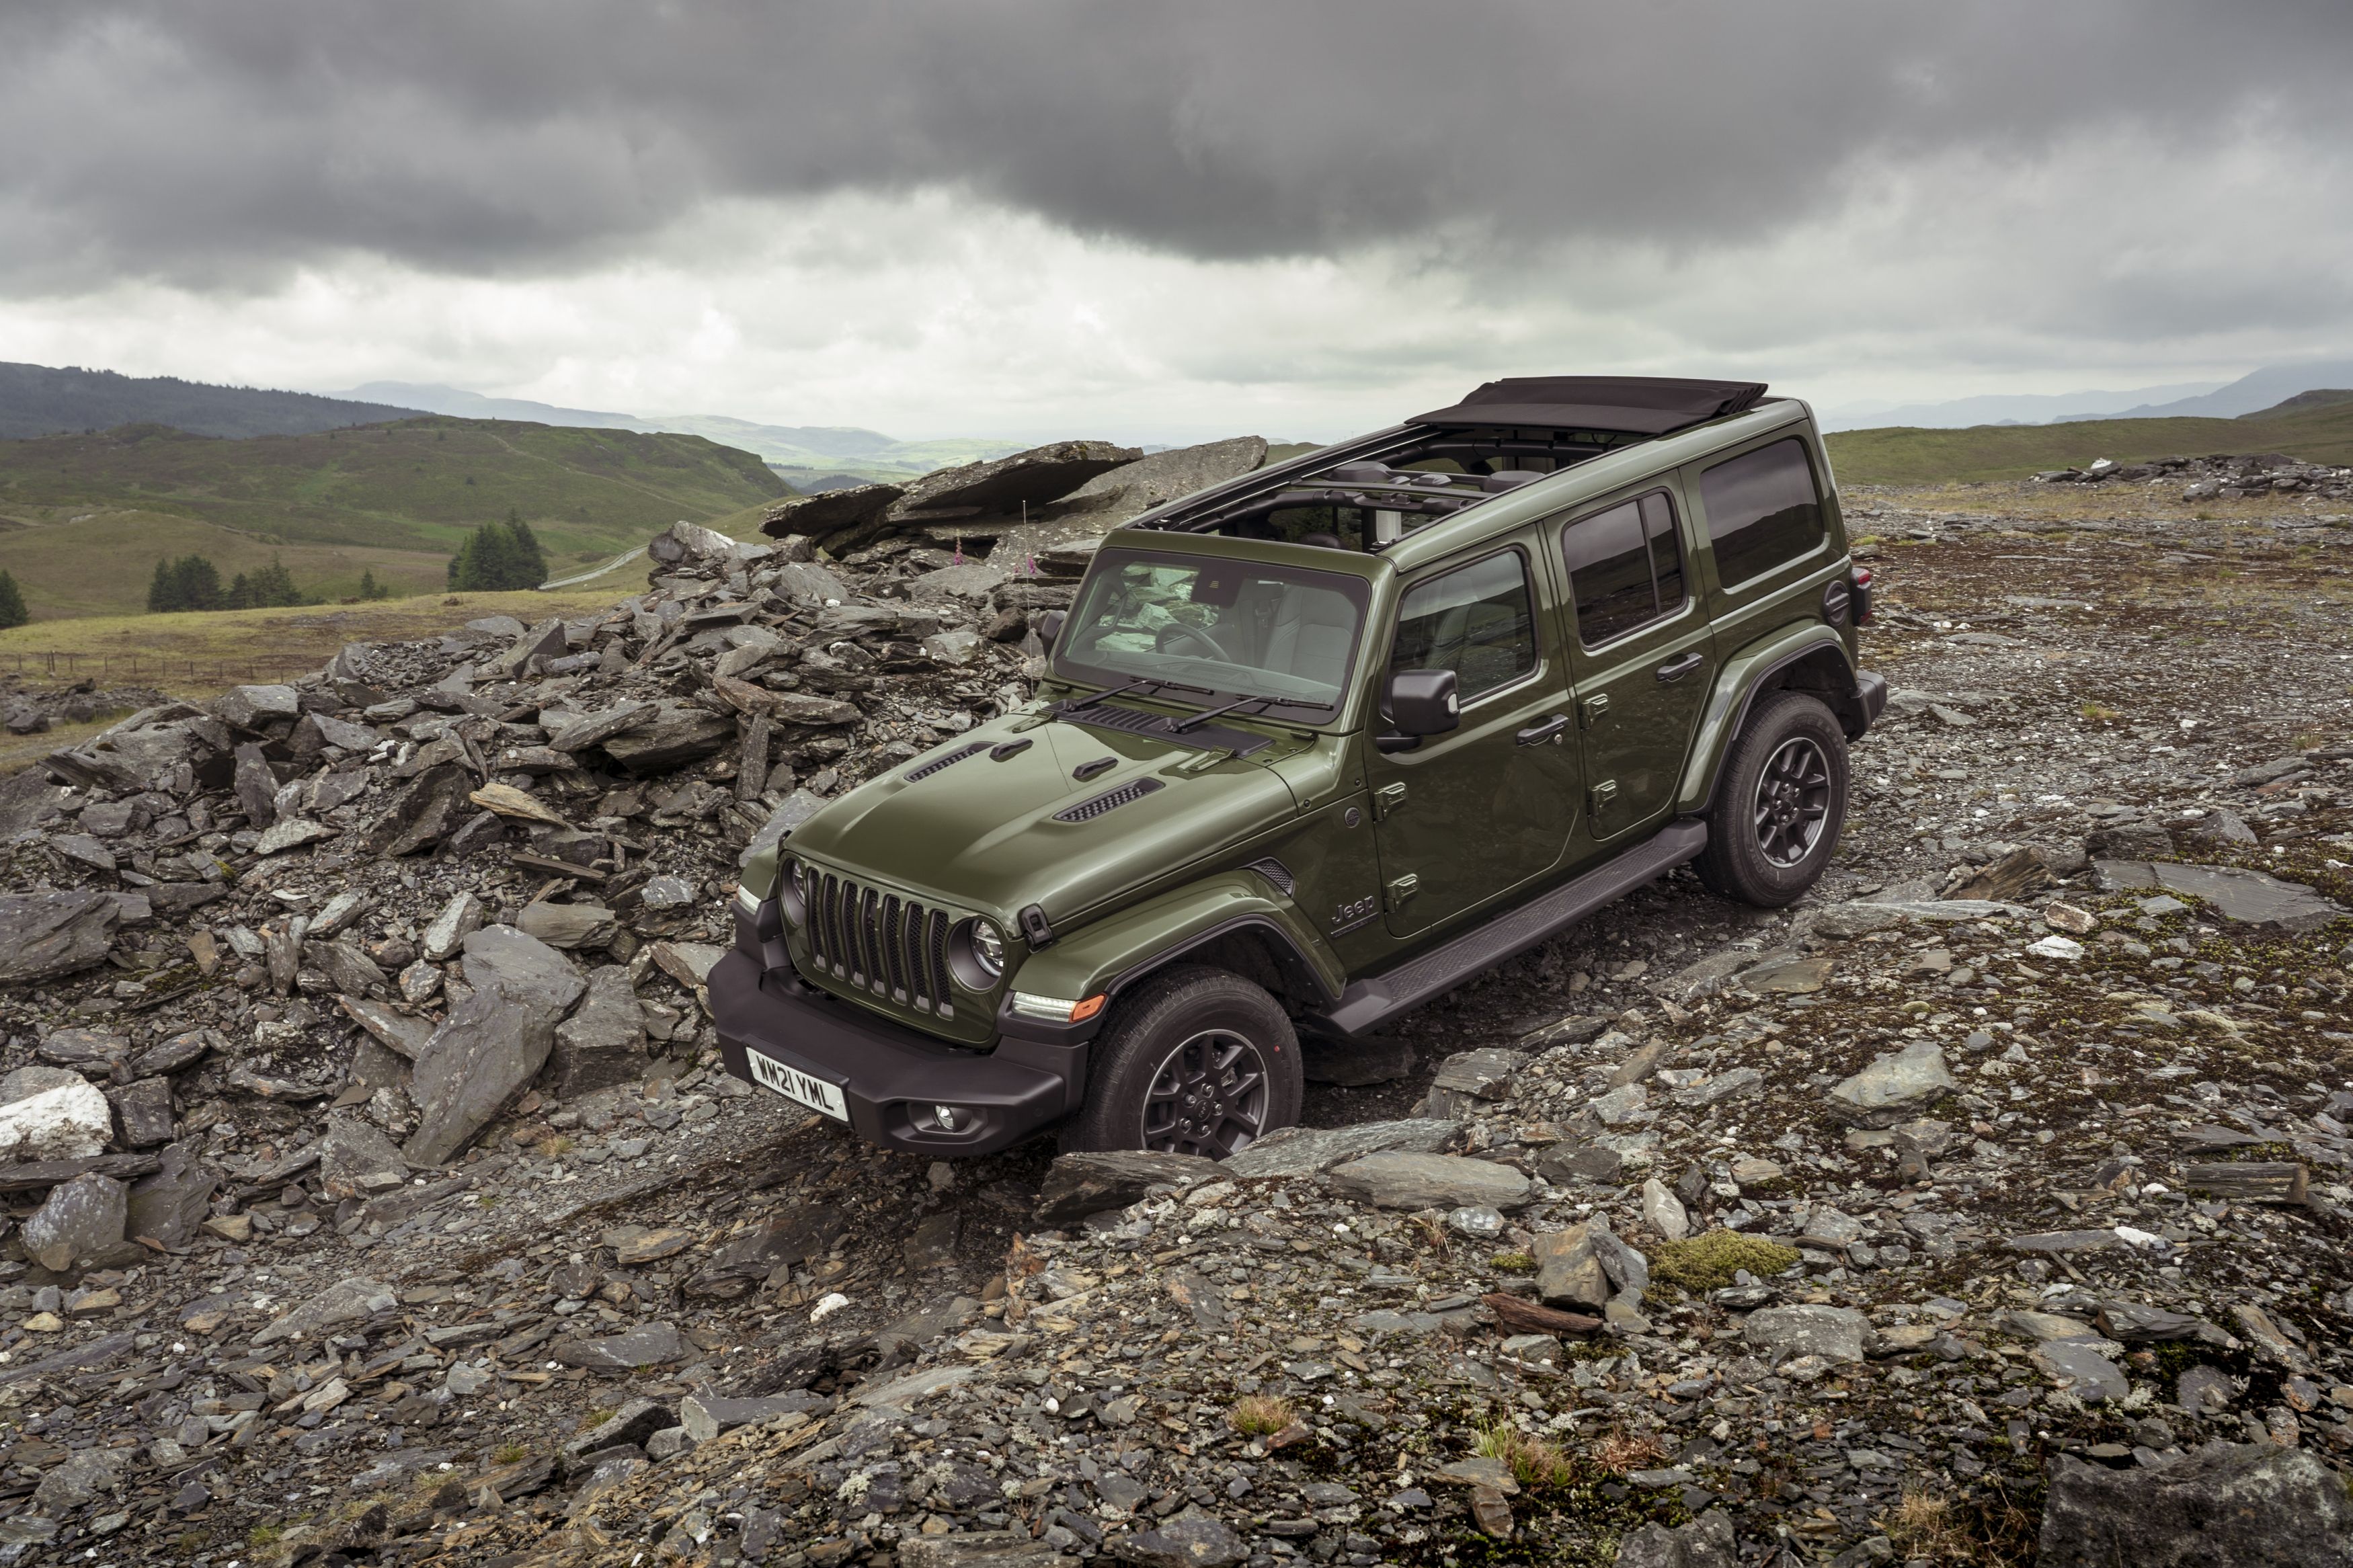 REBOOT: The new Jeep Wrangler has been released to celebrate Jeep’s 80th birthday